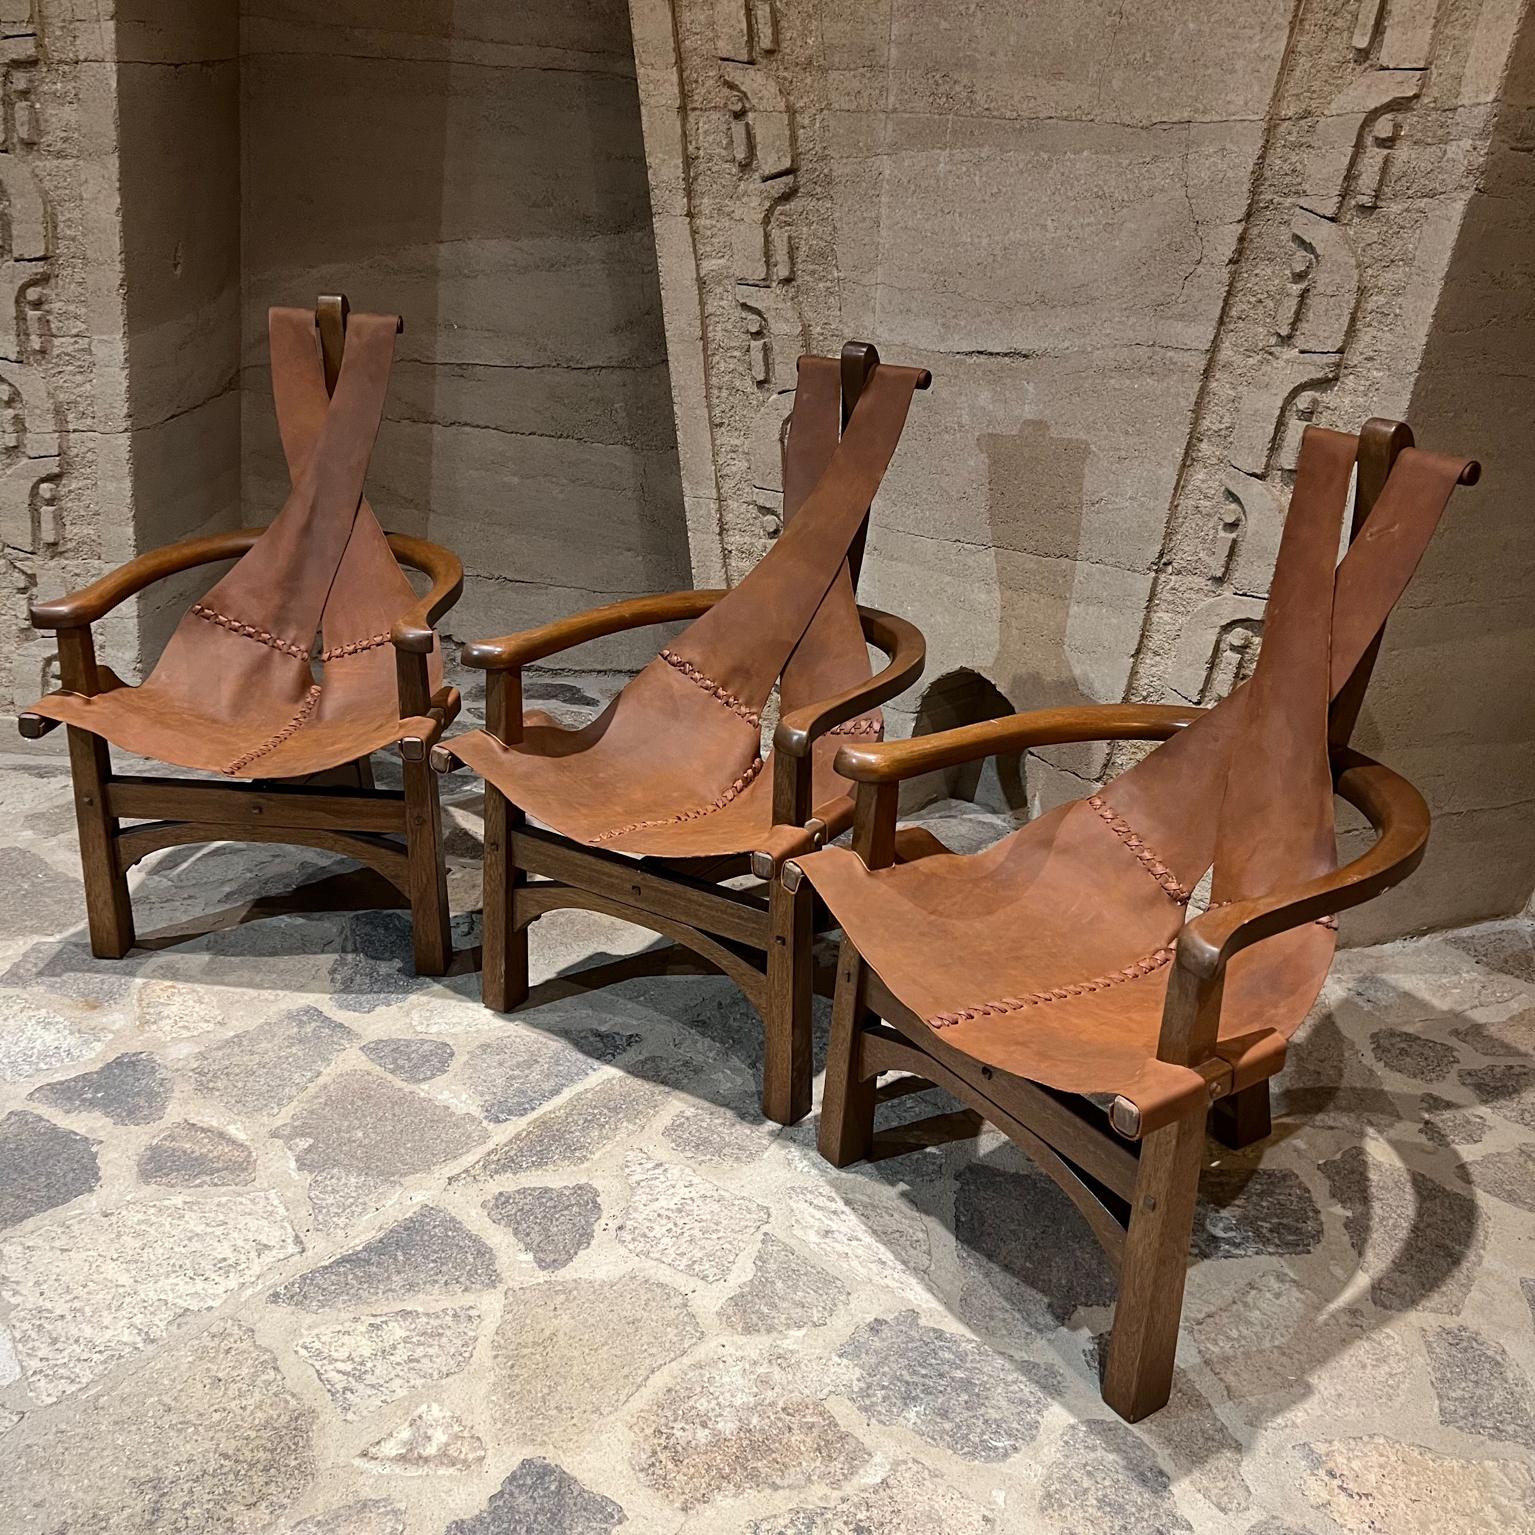 1970s Modern safari lounge set of three leather sling chairs on three-legged mahogany wood base
Brazilian style of Jean Gillon and Percival Lafer.
Unmarked.
Measures: 40 tall x 23 deep x 24 wide seat height 16.
Original preowned vintage